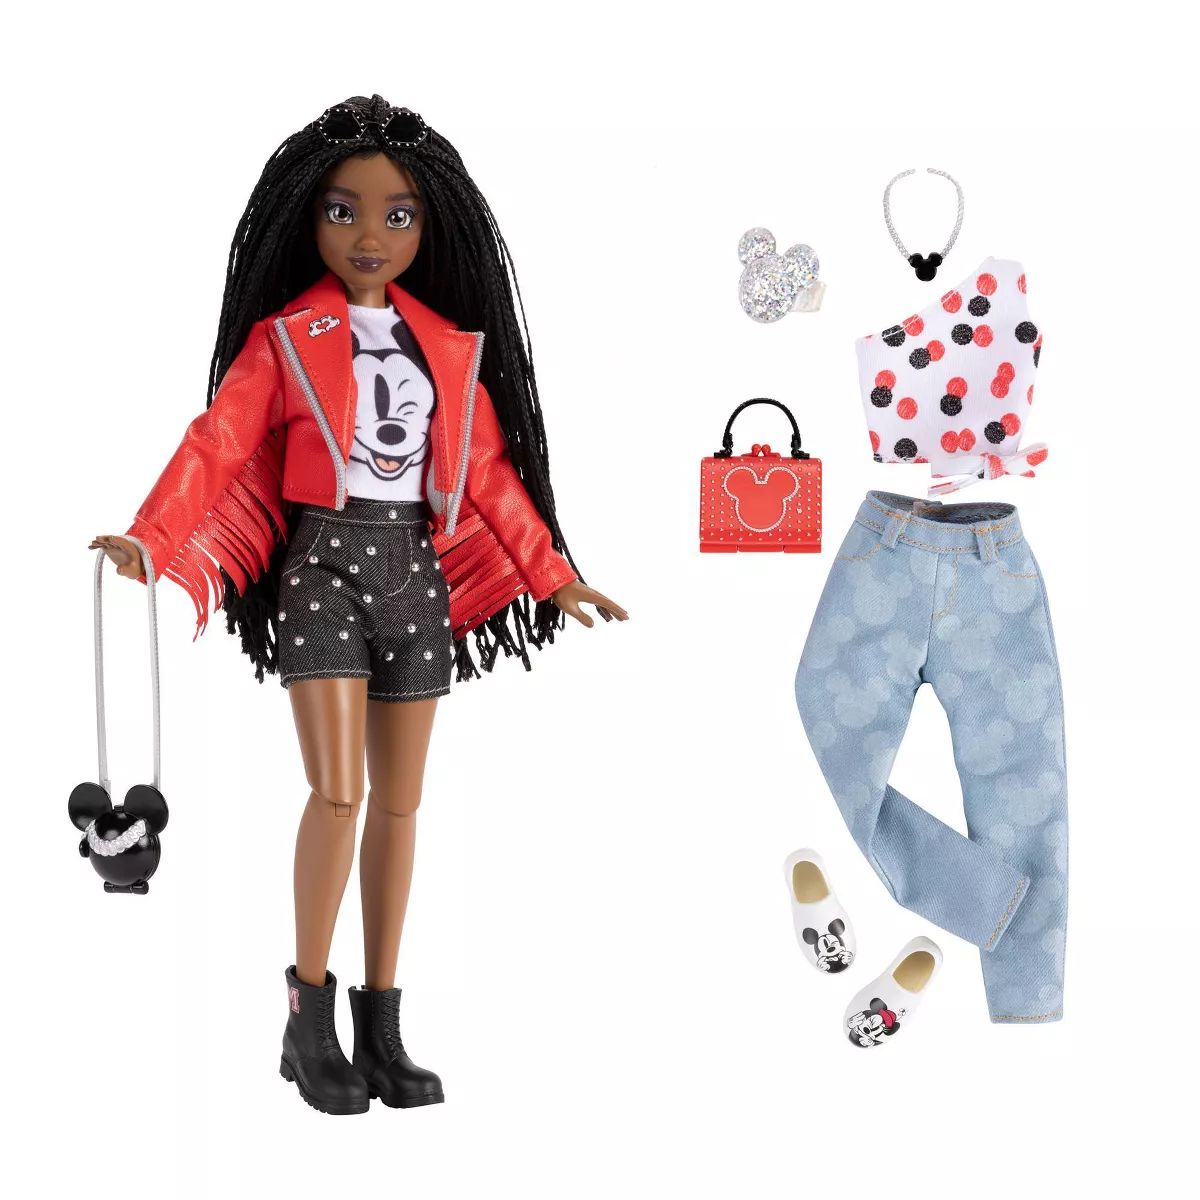 Disney ILY 4ever Fashion Doll - Inspired by Mickey Mouse | Target